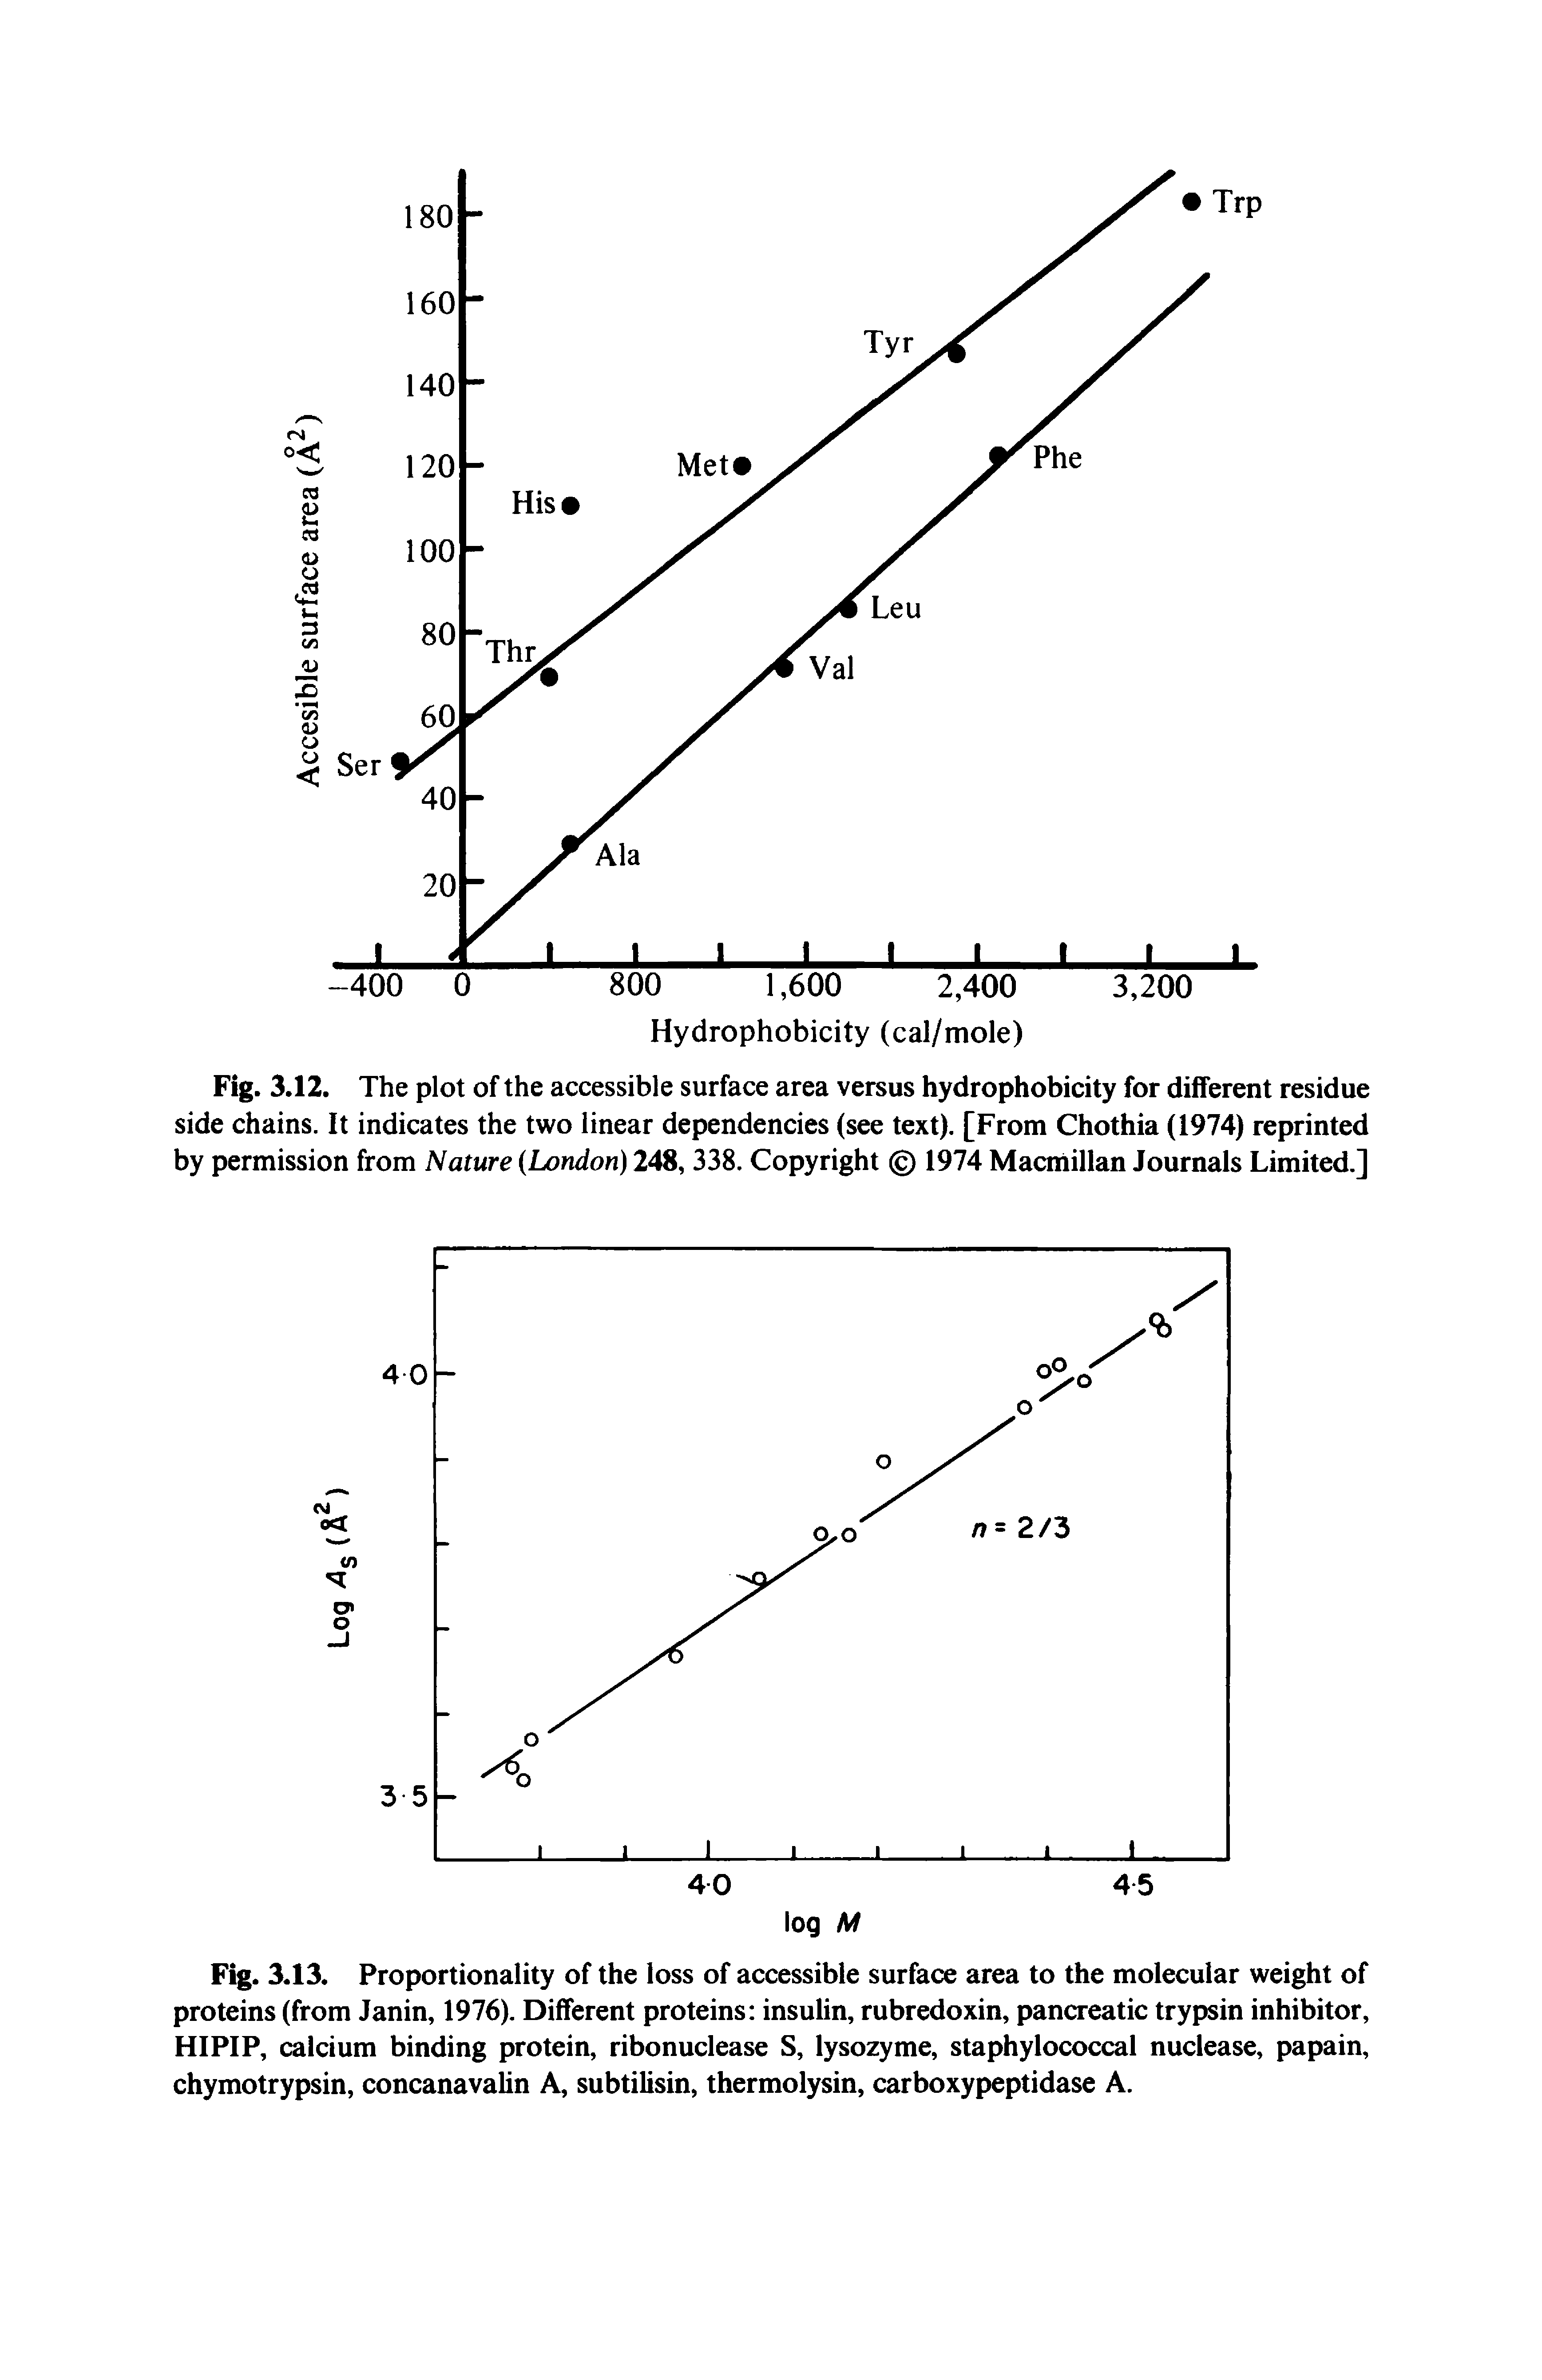 Fig. 3.13. Proportionality of the loss of accessible surface area to the molecular weight of proteins (from Janin, 1976). Different proteins insulin, rubredoxin, pancreatic trypsin inhibitor, HIPIP, calcium binding protein, ribonuclease S, lysozyme, staphylococcal nuclease, papain, chymotrypsin, concanavalin A, subtilisin, thermolysin, carboxypeptidase A.